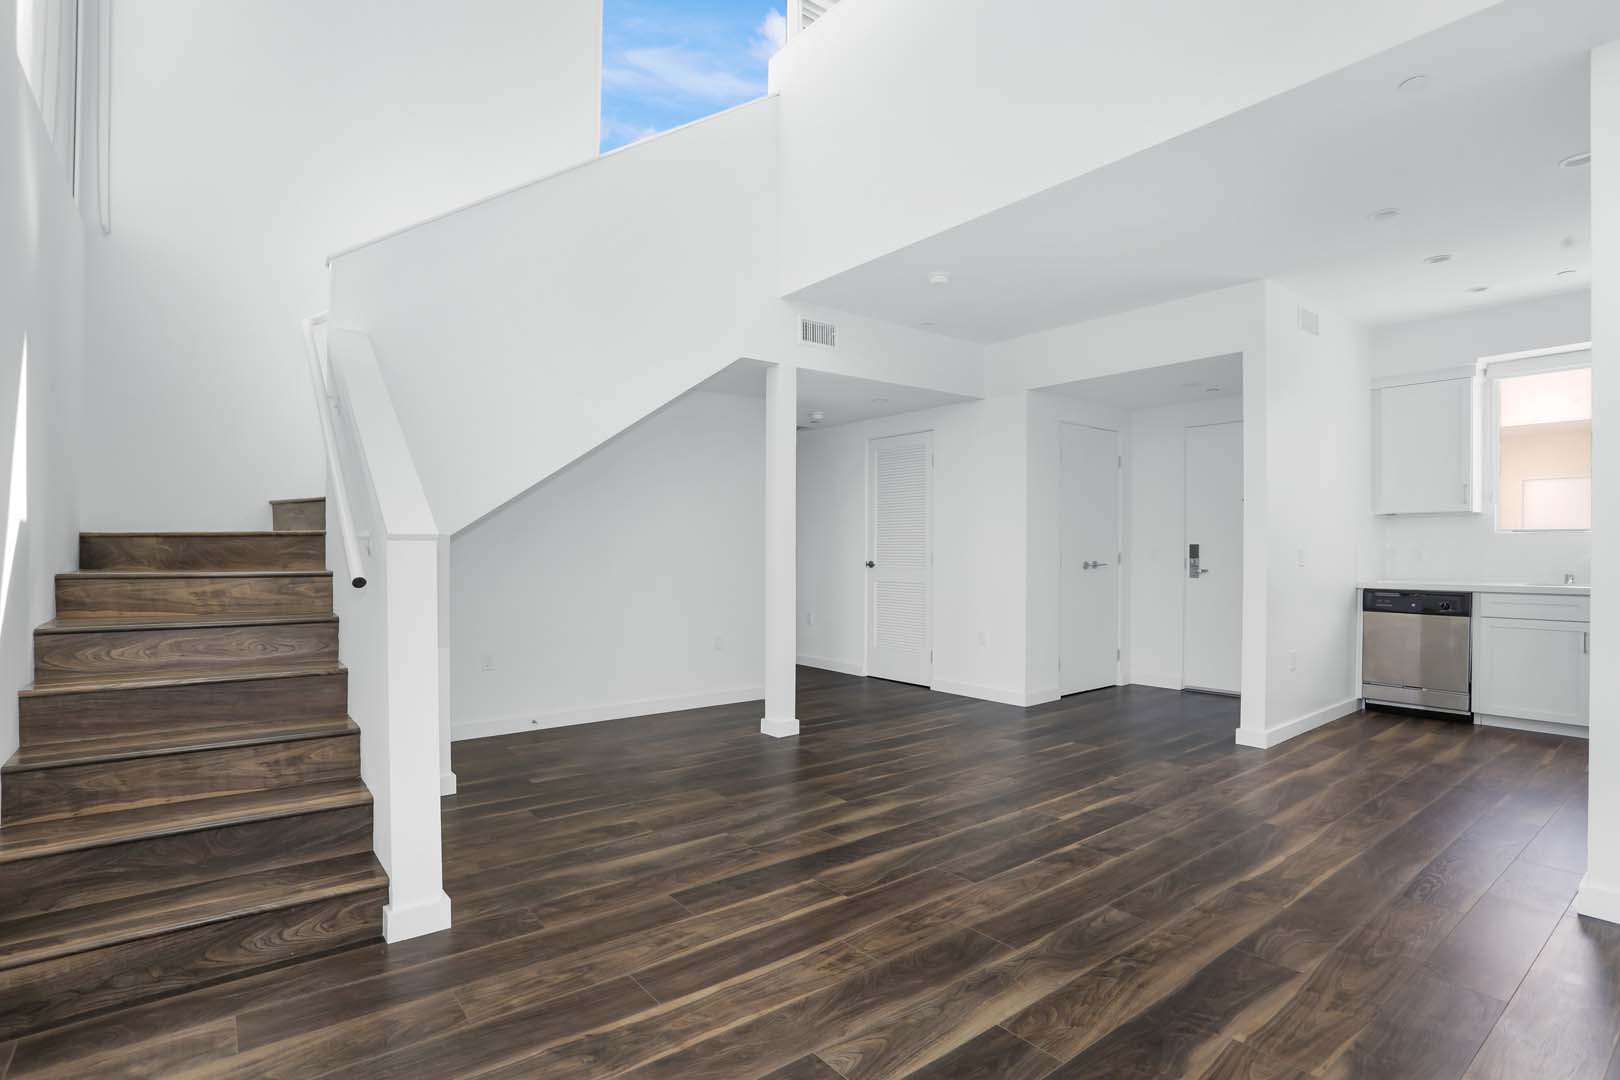 Culver City CA Apartments for Rent - The Lucky - Large Living Area with Hardwood Floors, Large Ceilings, and Stairway to Second Floor